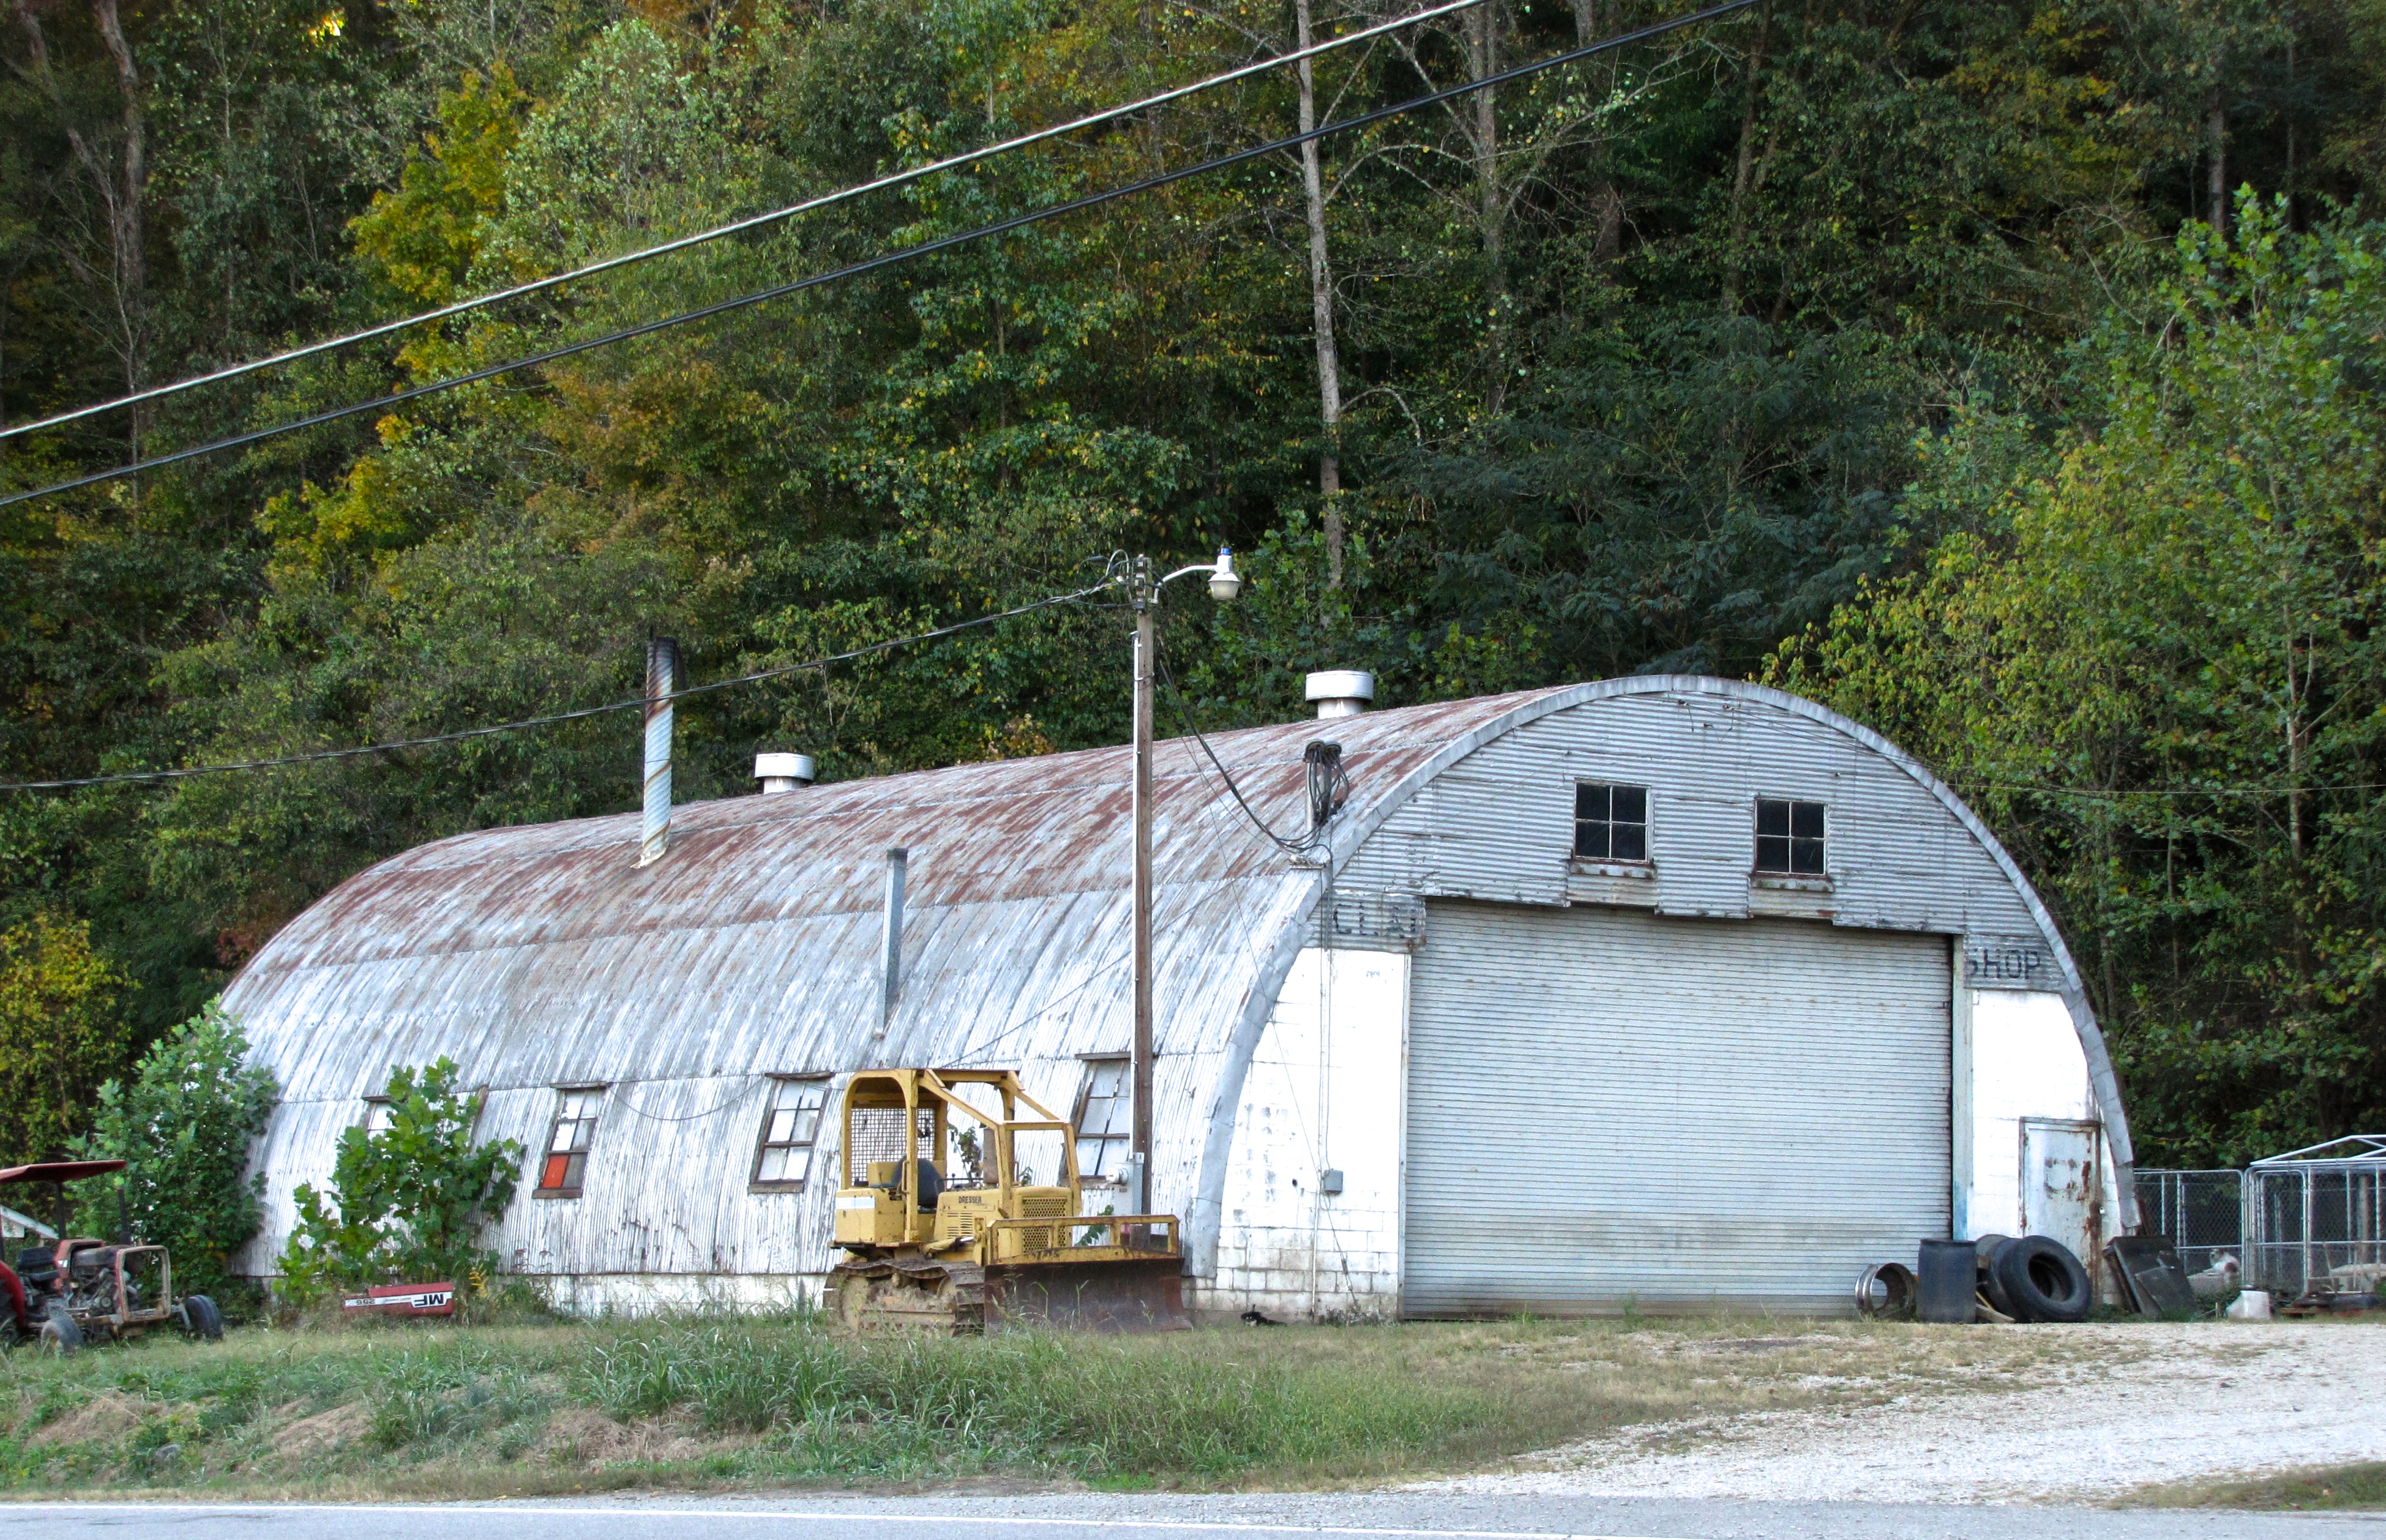 quonset hut in Anderson, IN